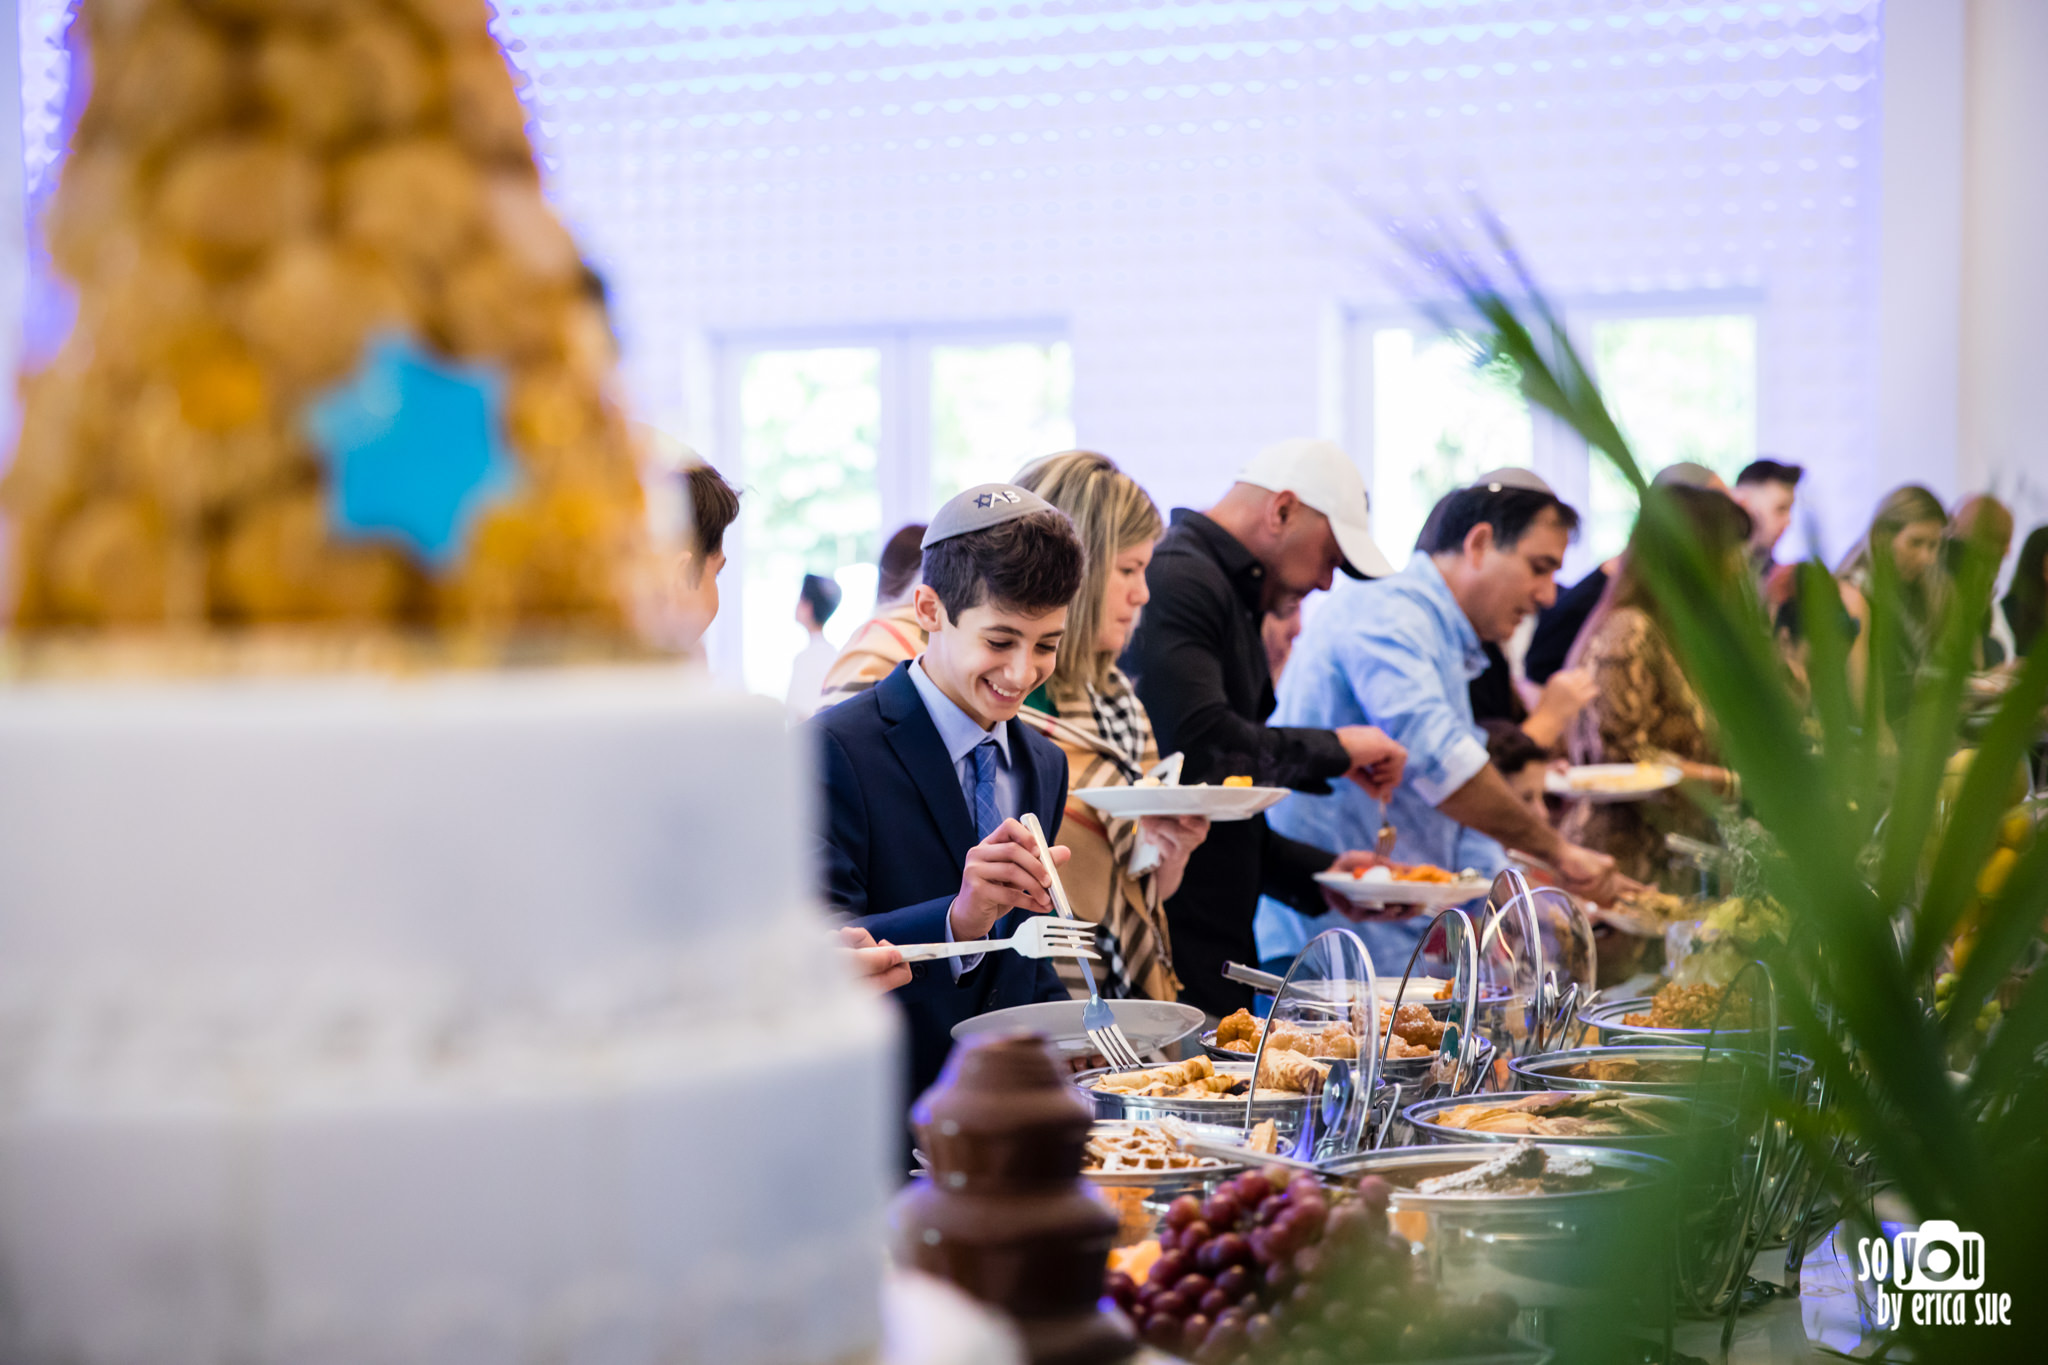 so-you-by-erica-sue-mitzvah-bnai-sephardim-hollywood-one-event-place-kosher-caterer-1027.jpg